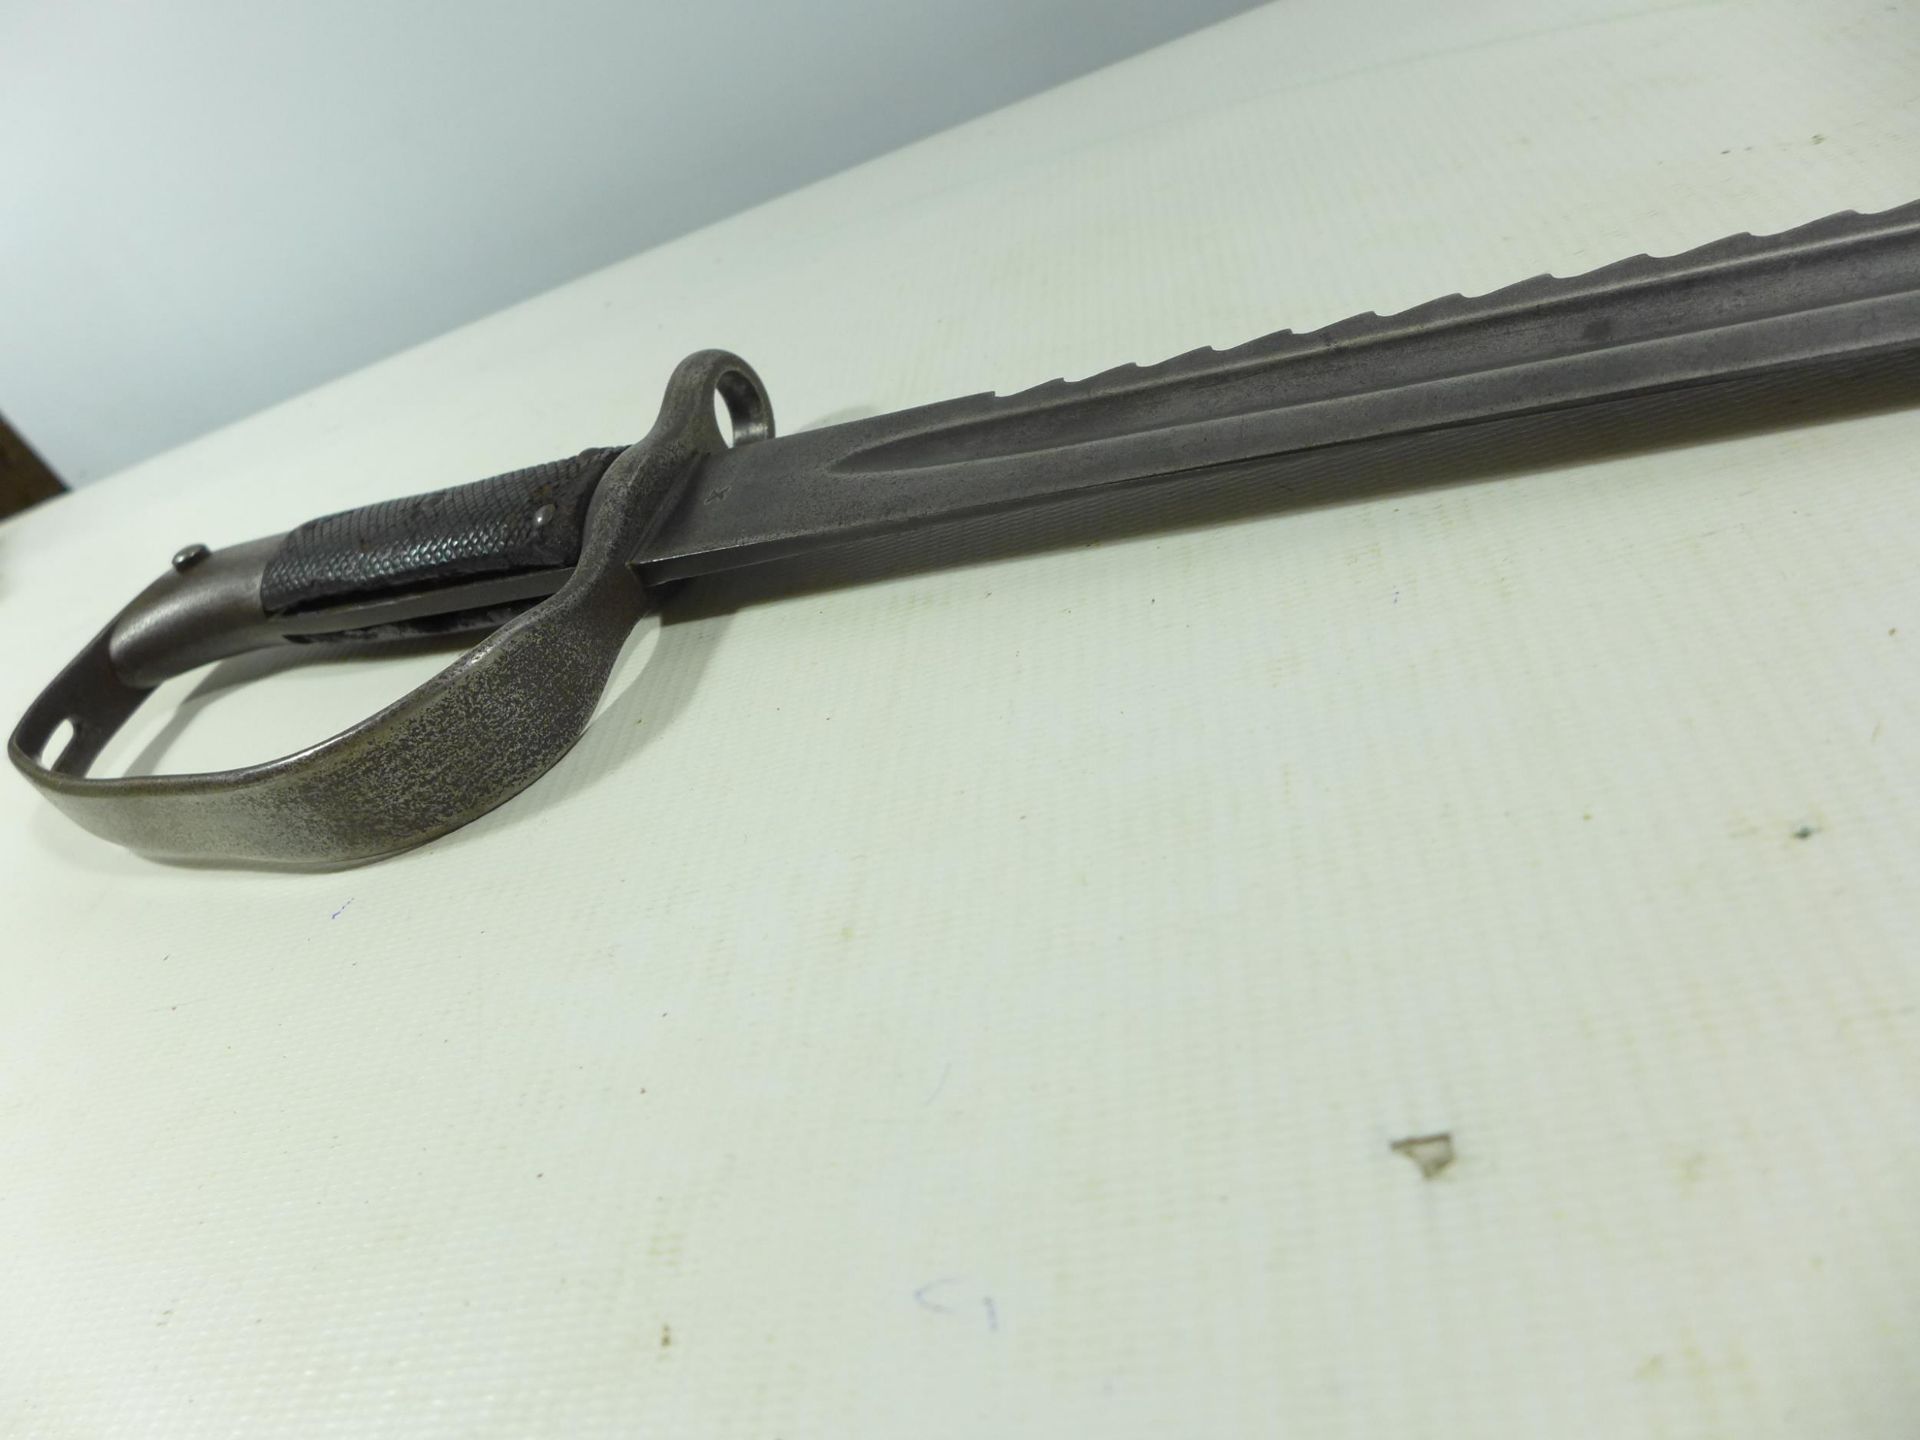 A LATE 19TH/EARLY 20TH CENTURY SAWBACK BAYONET FOR A MARTINI HENRY CARBINE, 65CM BLADE - Image 9 of 9